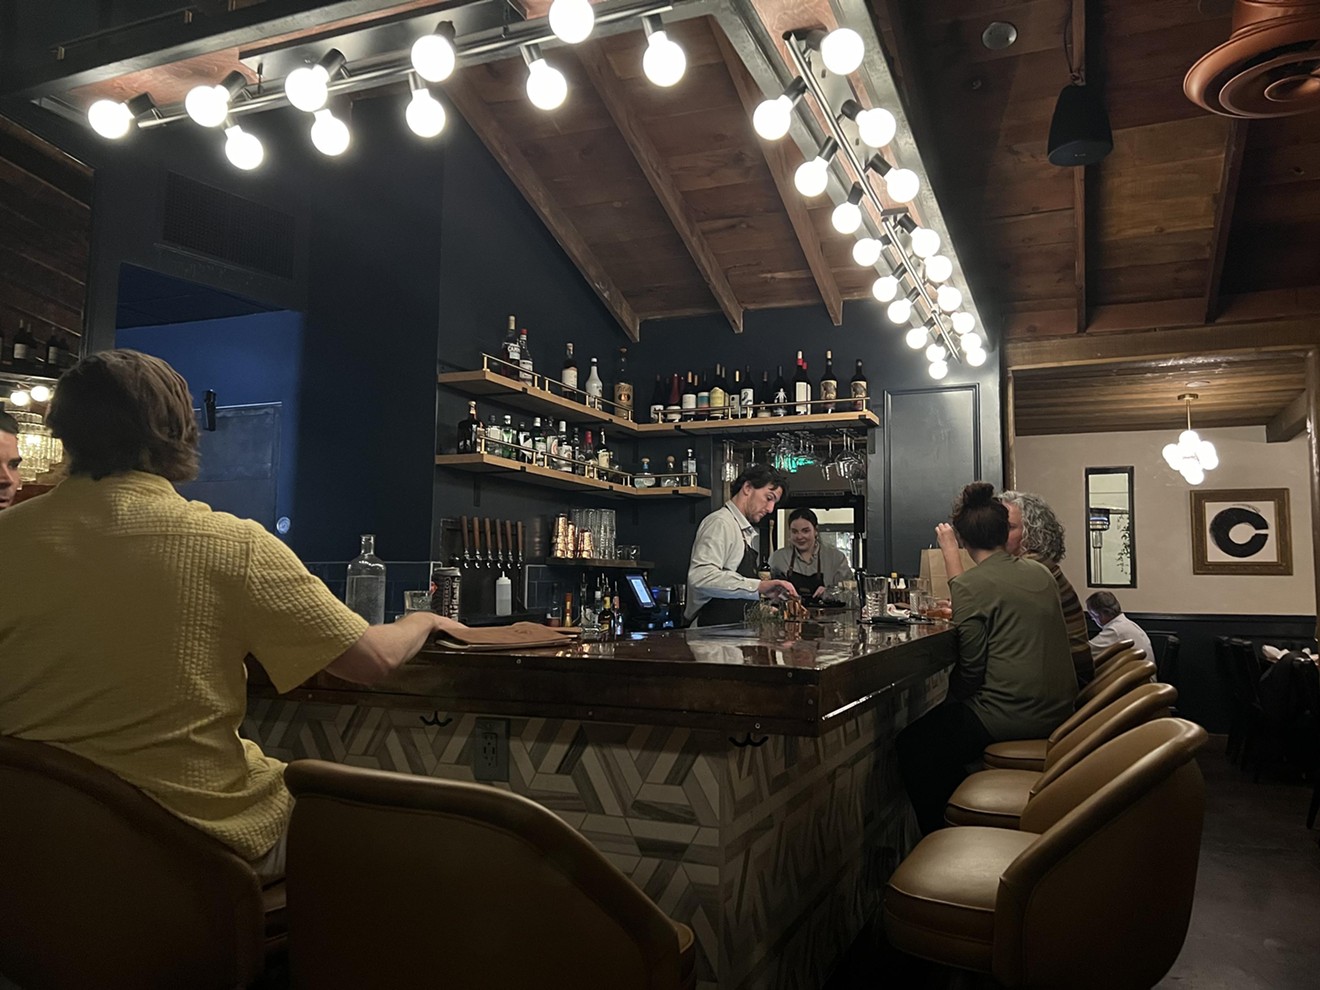 Copper & Sage opened on Camelback Road in November. It's part of a dual concept with neighboring bar Blue Stave.